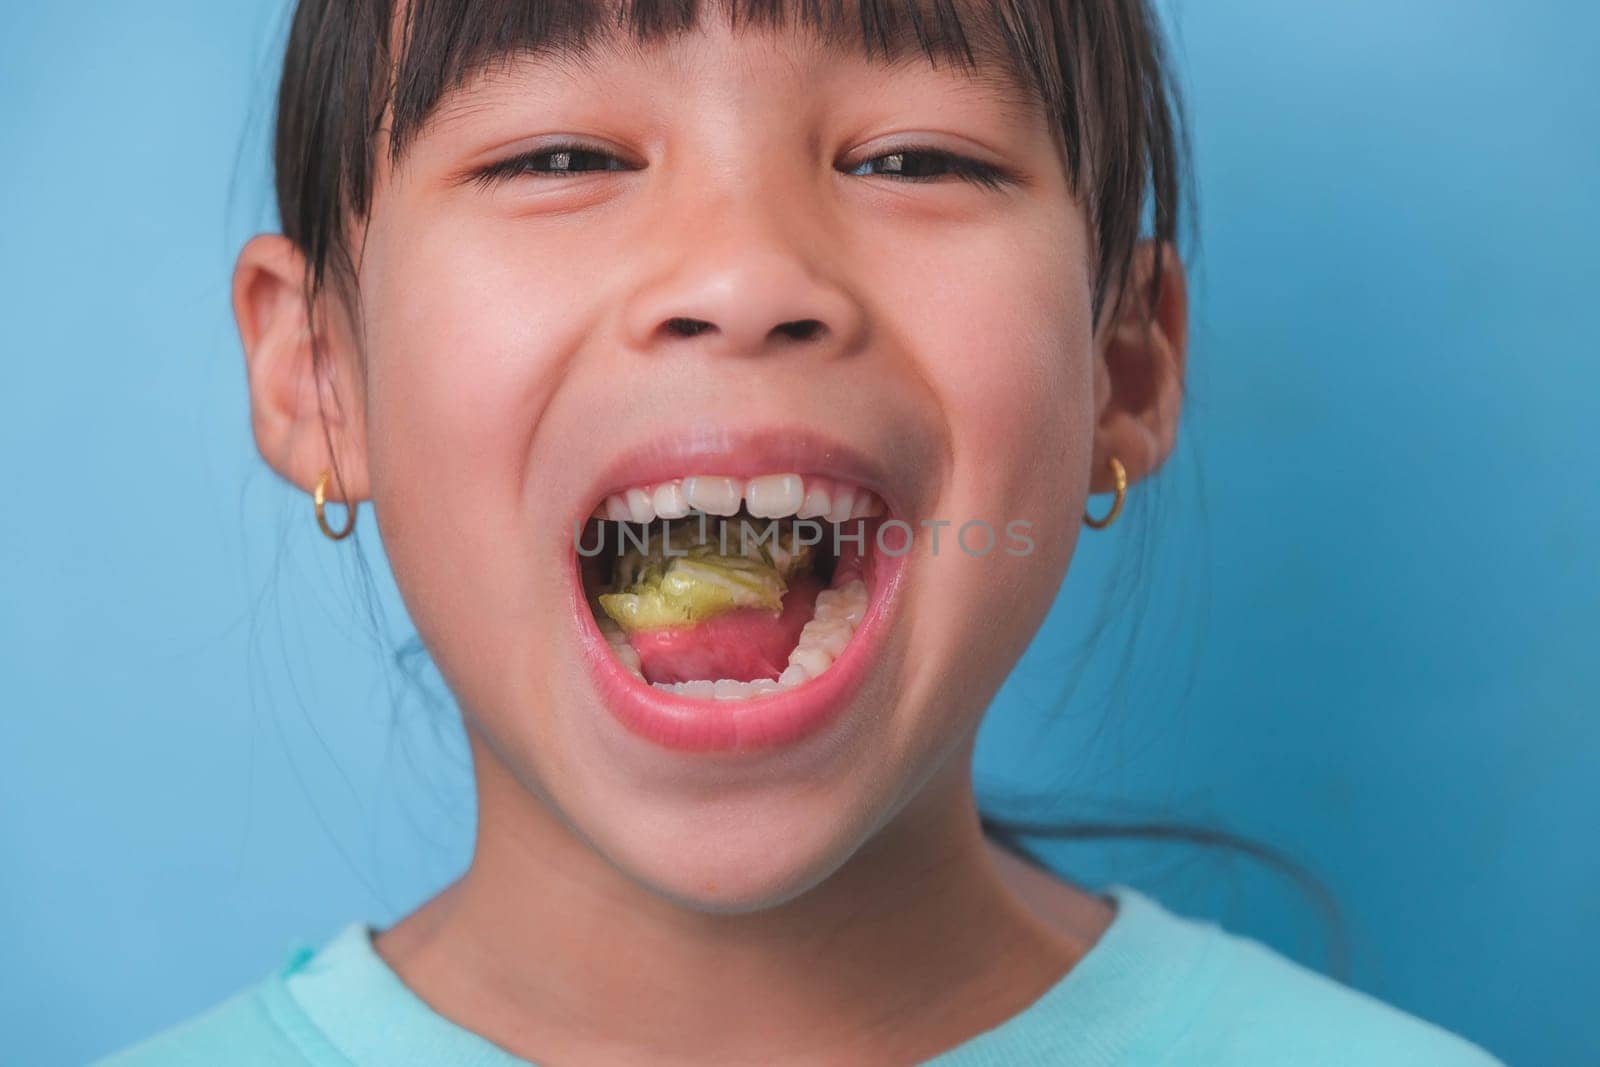 Smiling cute little girl eating sweet gelatin with sugar added isolated on blue background. Children eat sugary sweets, causing loss teeth or tooth decay and unhealthy oral care. by TEERASAK